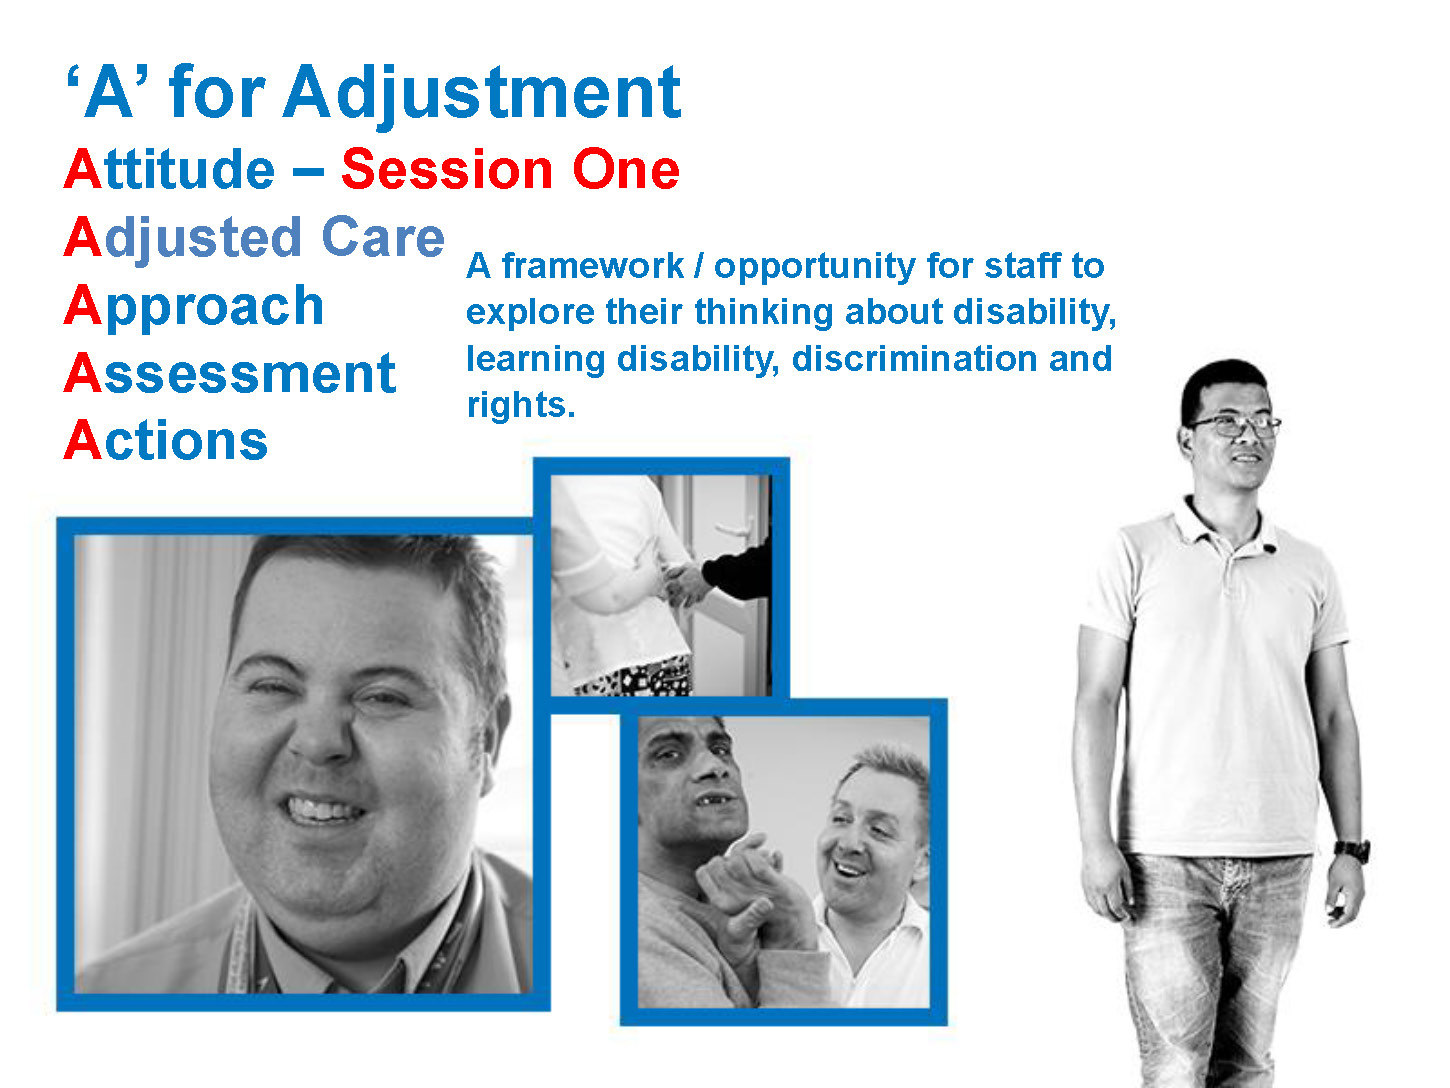 A for adjustment Slides session one attitude Page 01